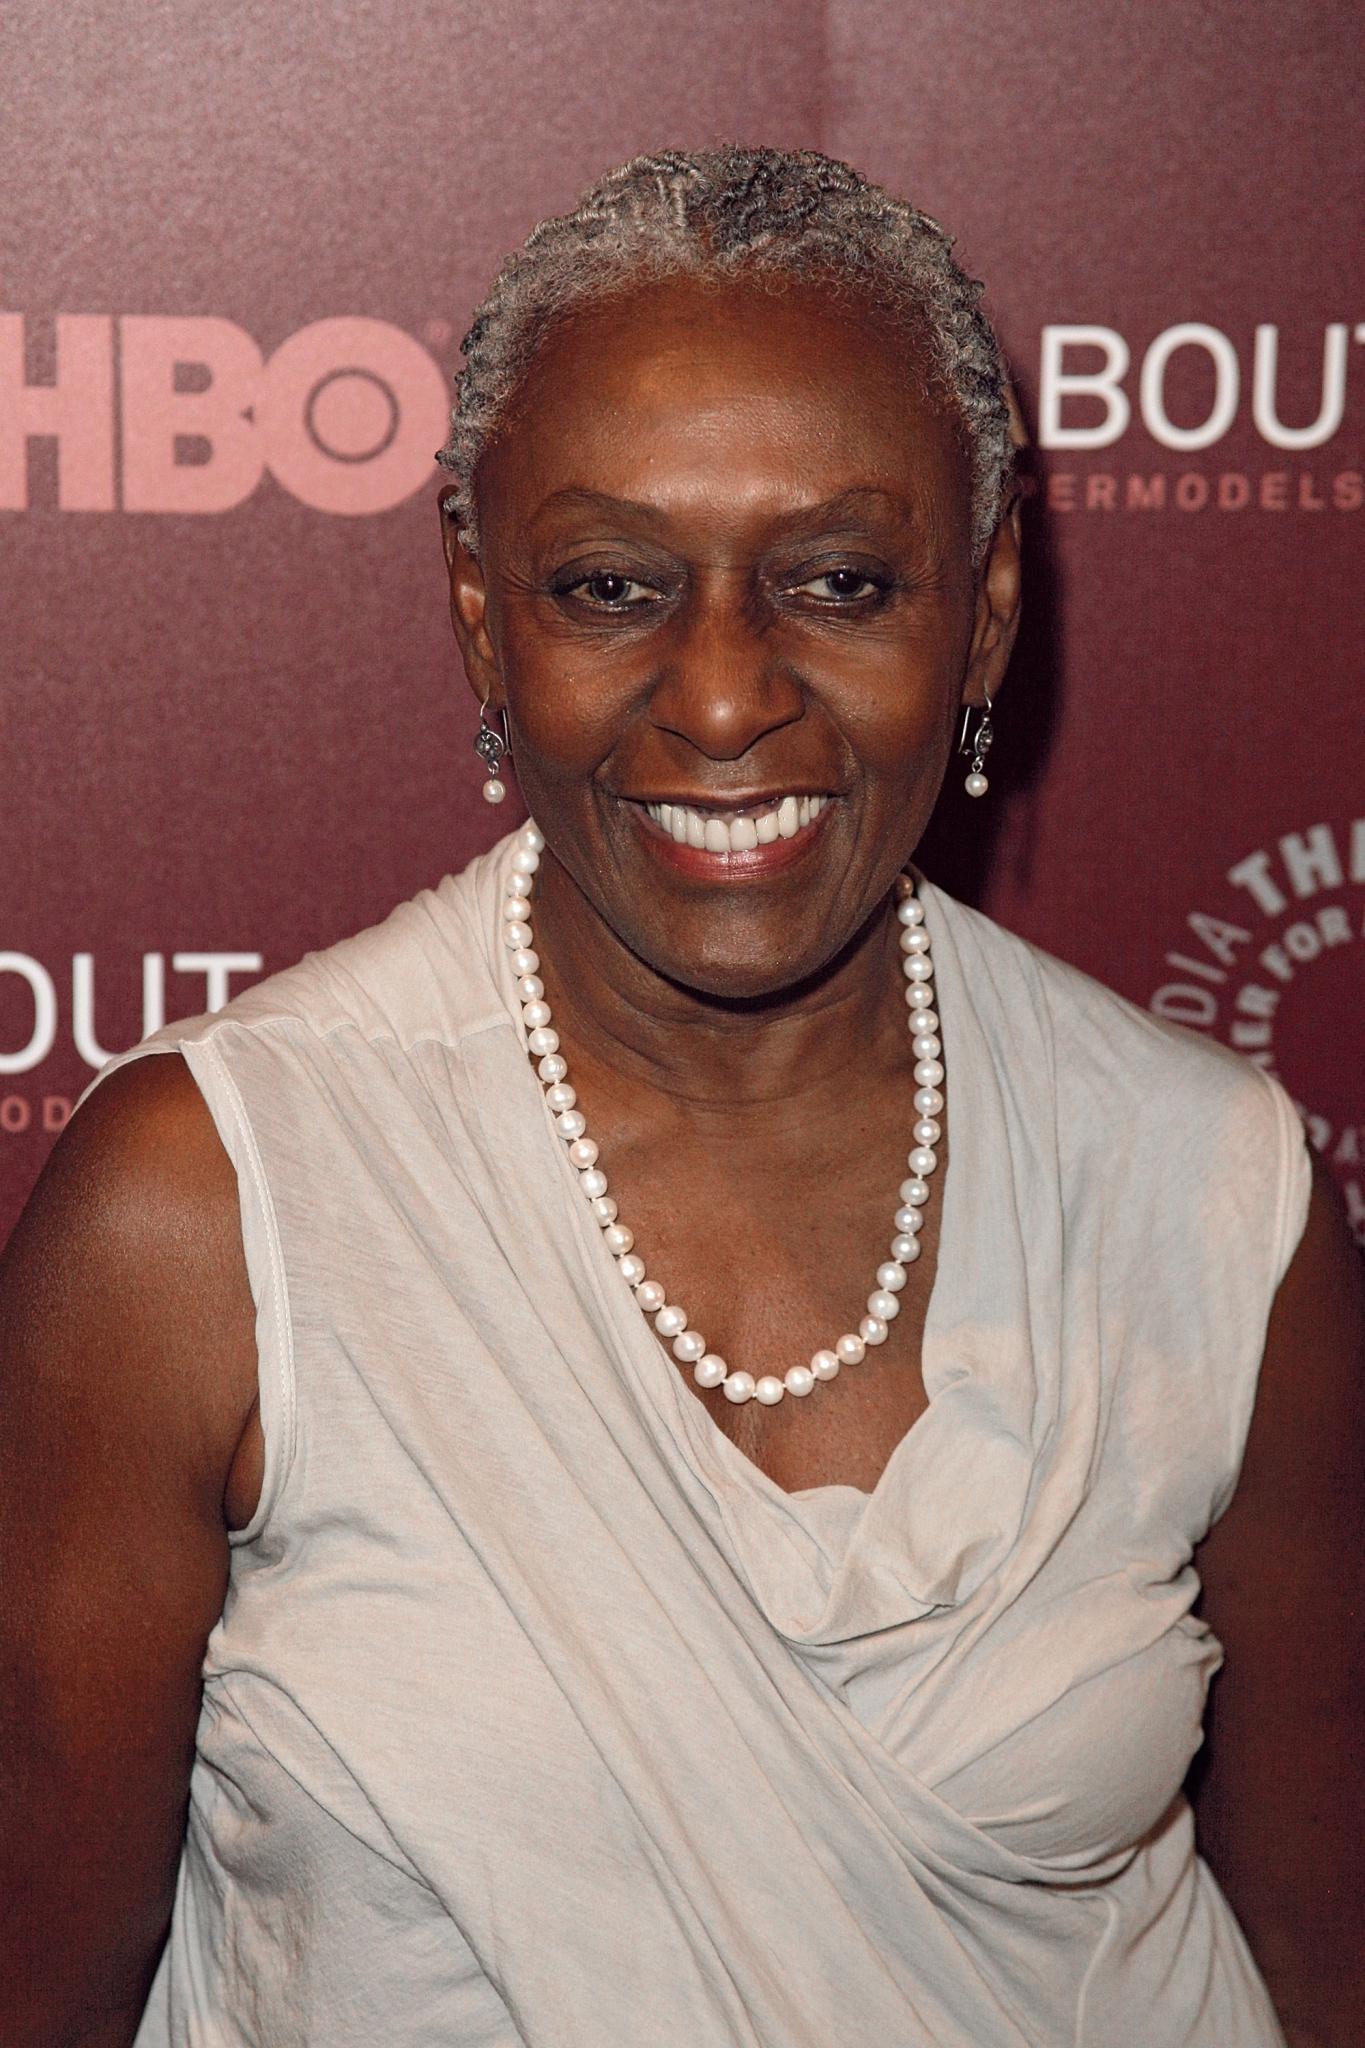 TODAY @ 12pm ET: Bethann Hardison Hosts ESSENCE Twitter Chat on Lack of Black Models at NYFW
